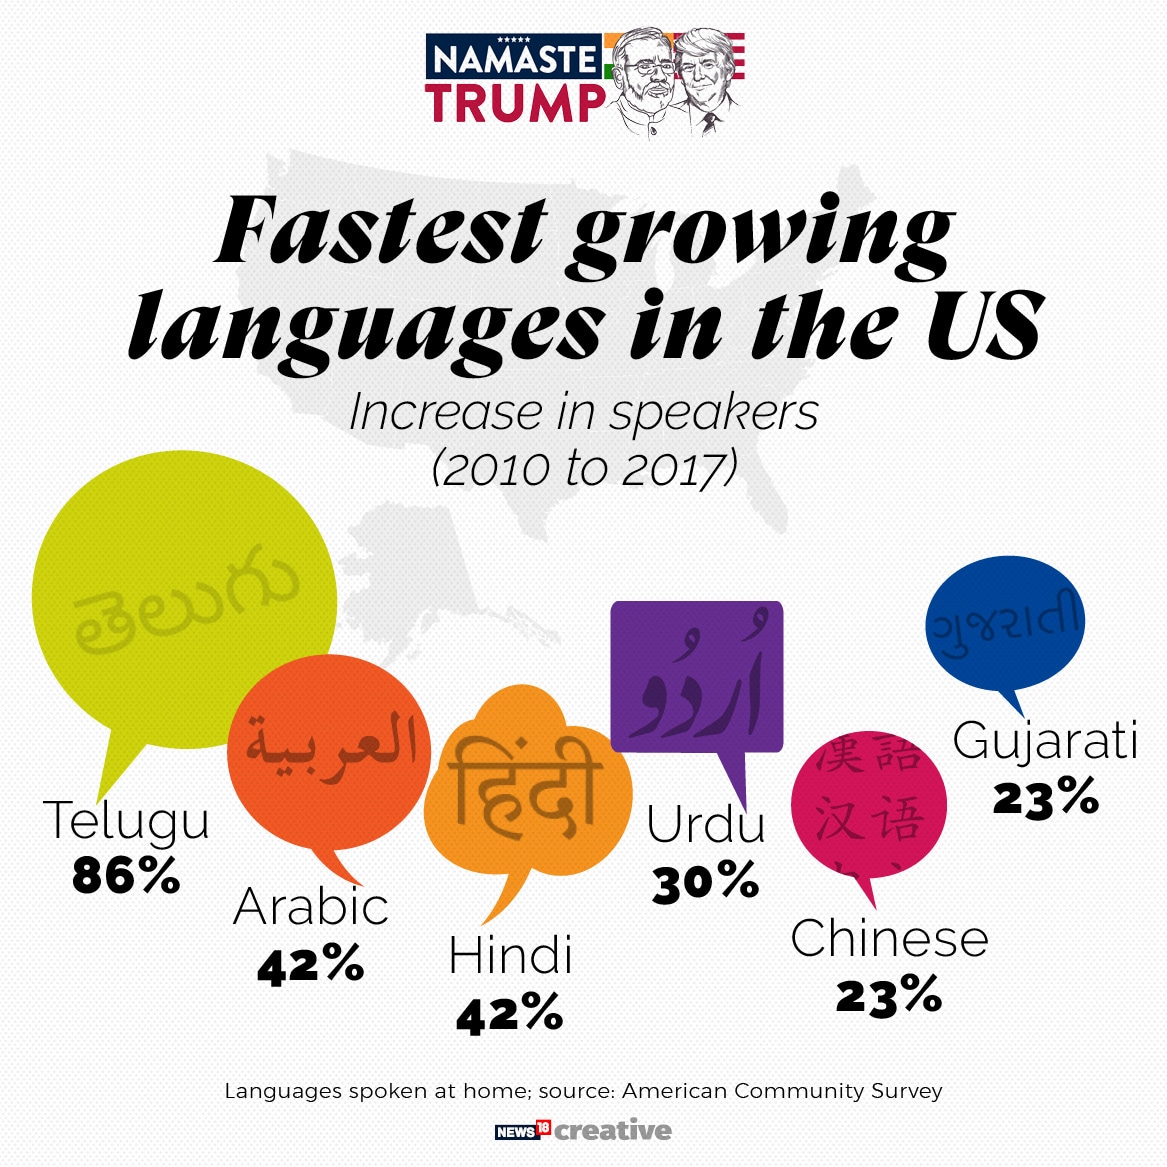 Indian languages in the United States